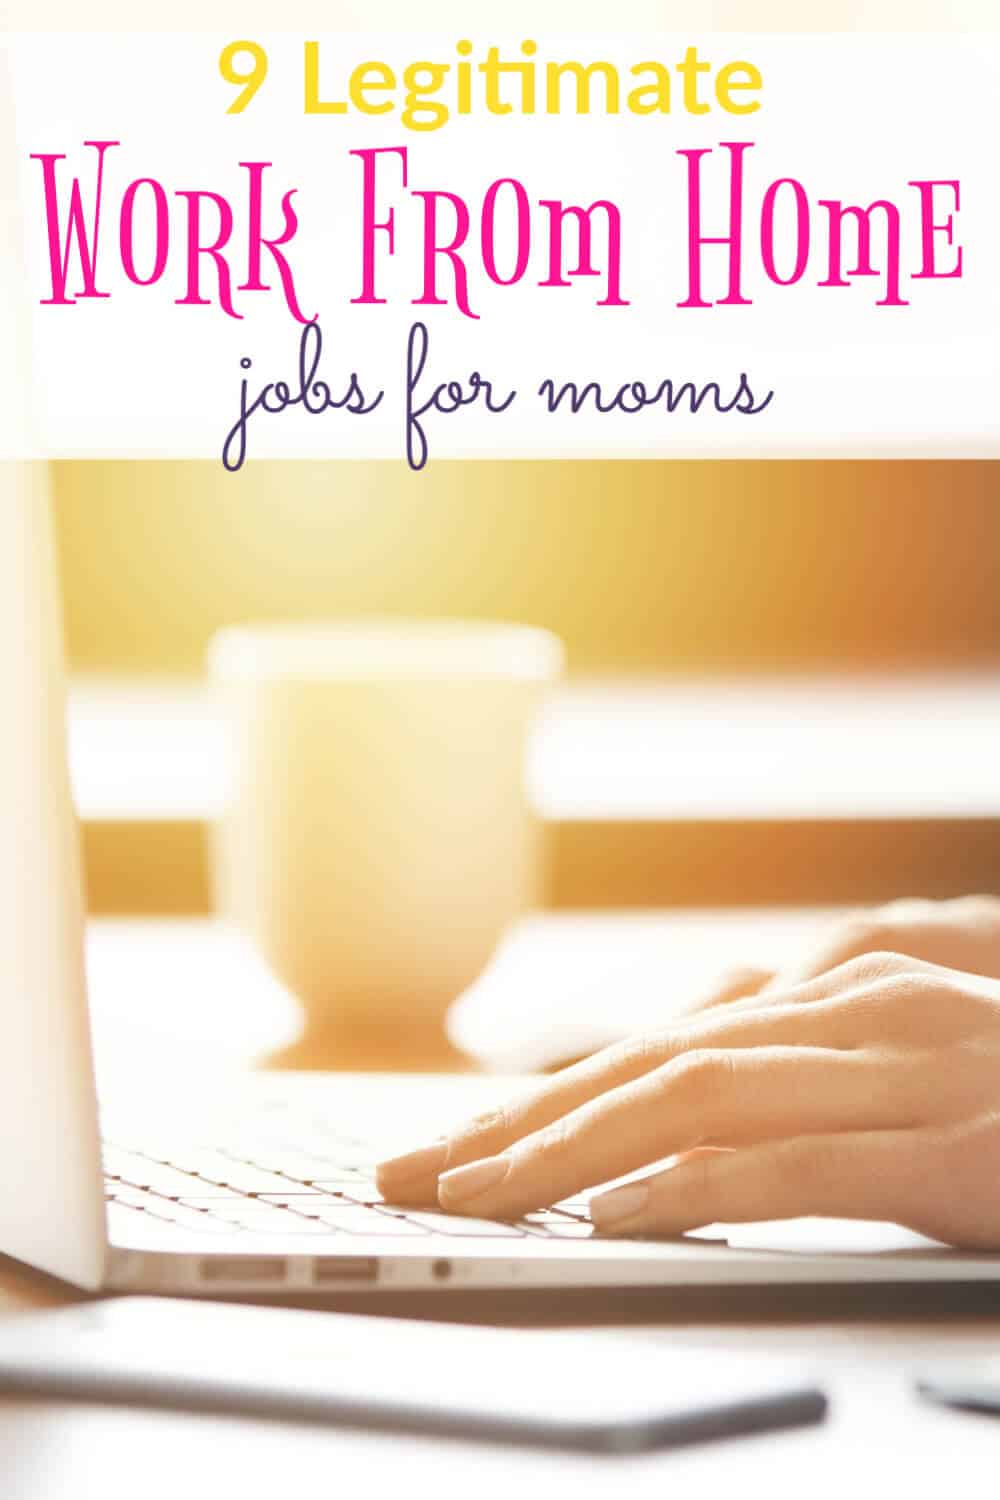 So many working moms would love the chance to stay home with their kids, but can't for financial reasons. And trying to find a work from home job can be daunting, so we've compiled a list of 9 legitimate jobs for stay at home moms.